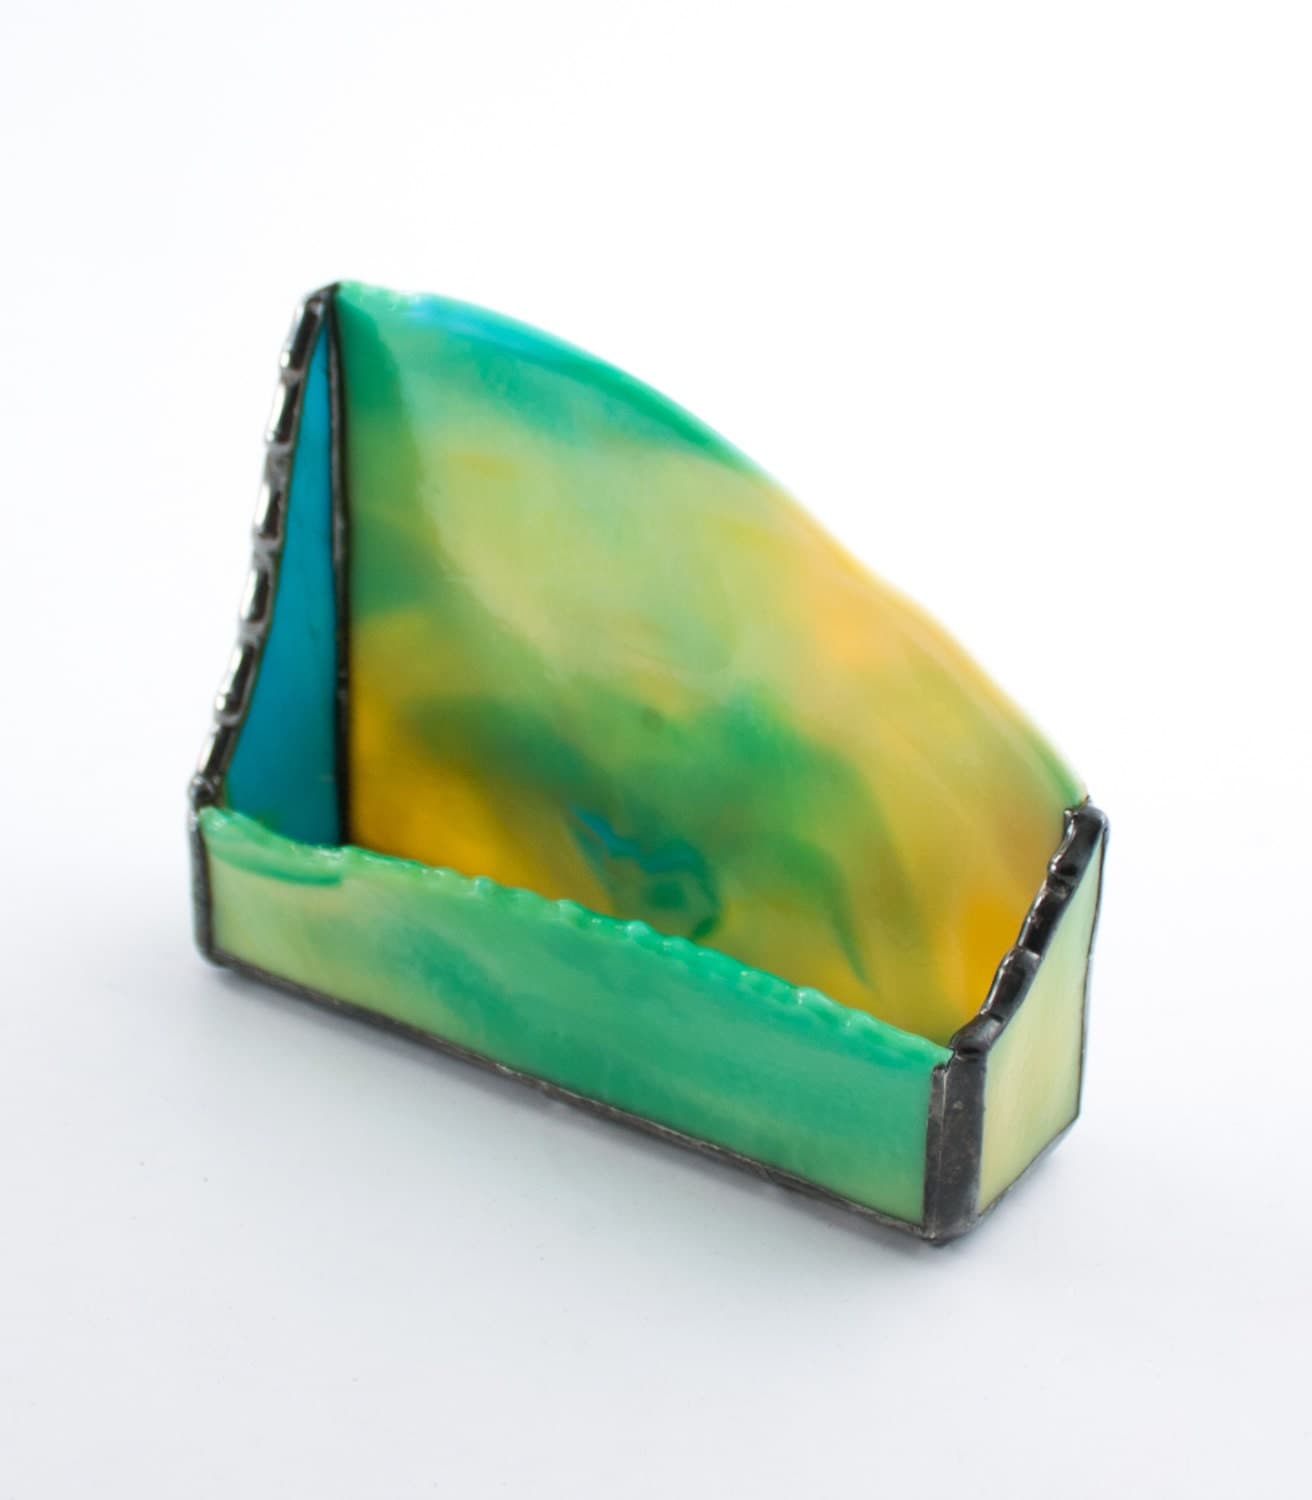 Unique Desktop Business Card Holder Yellow Green Stained